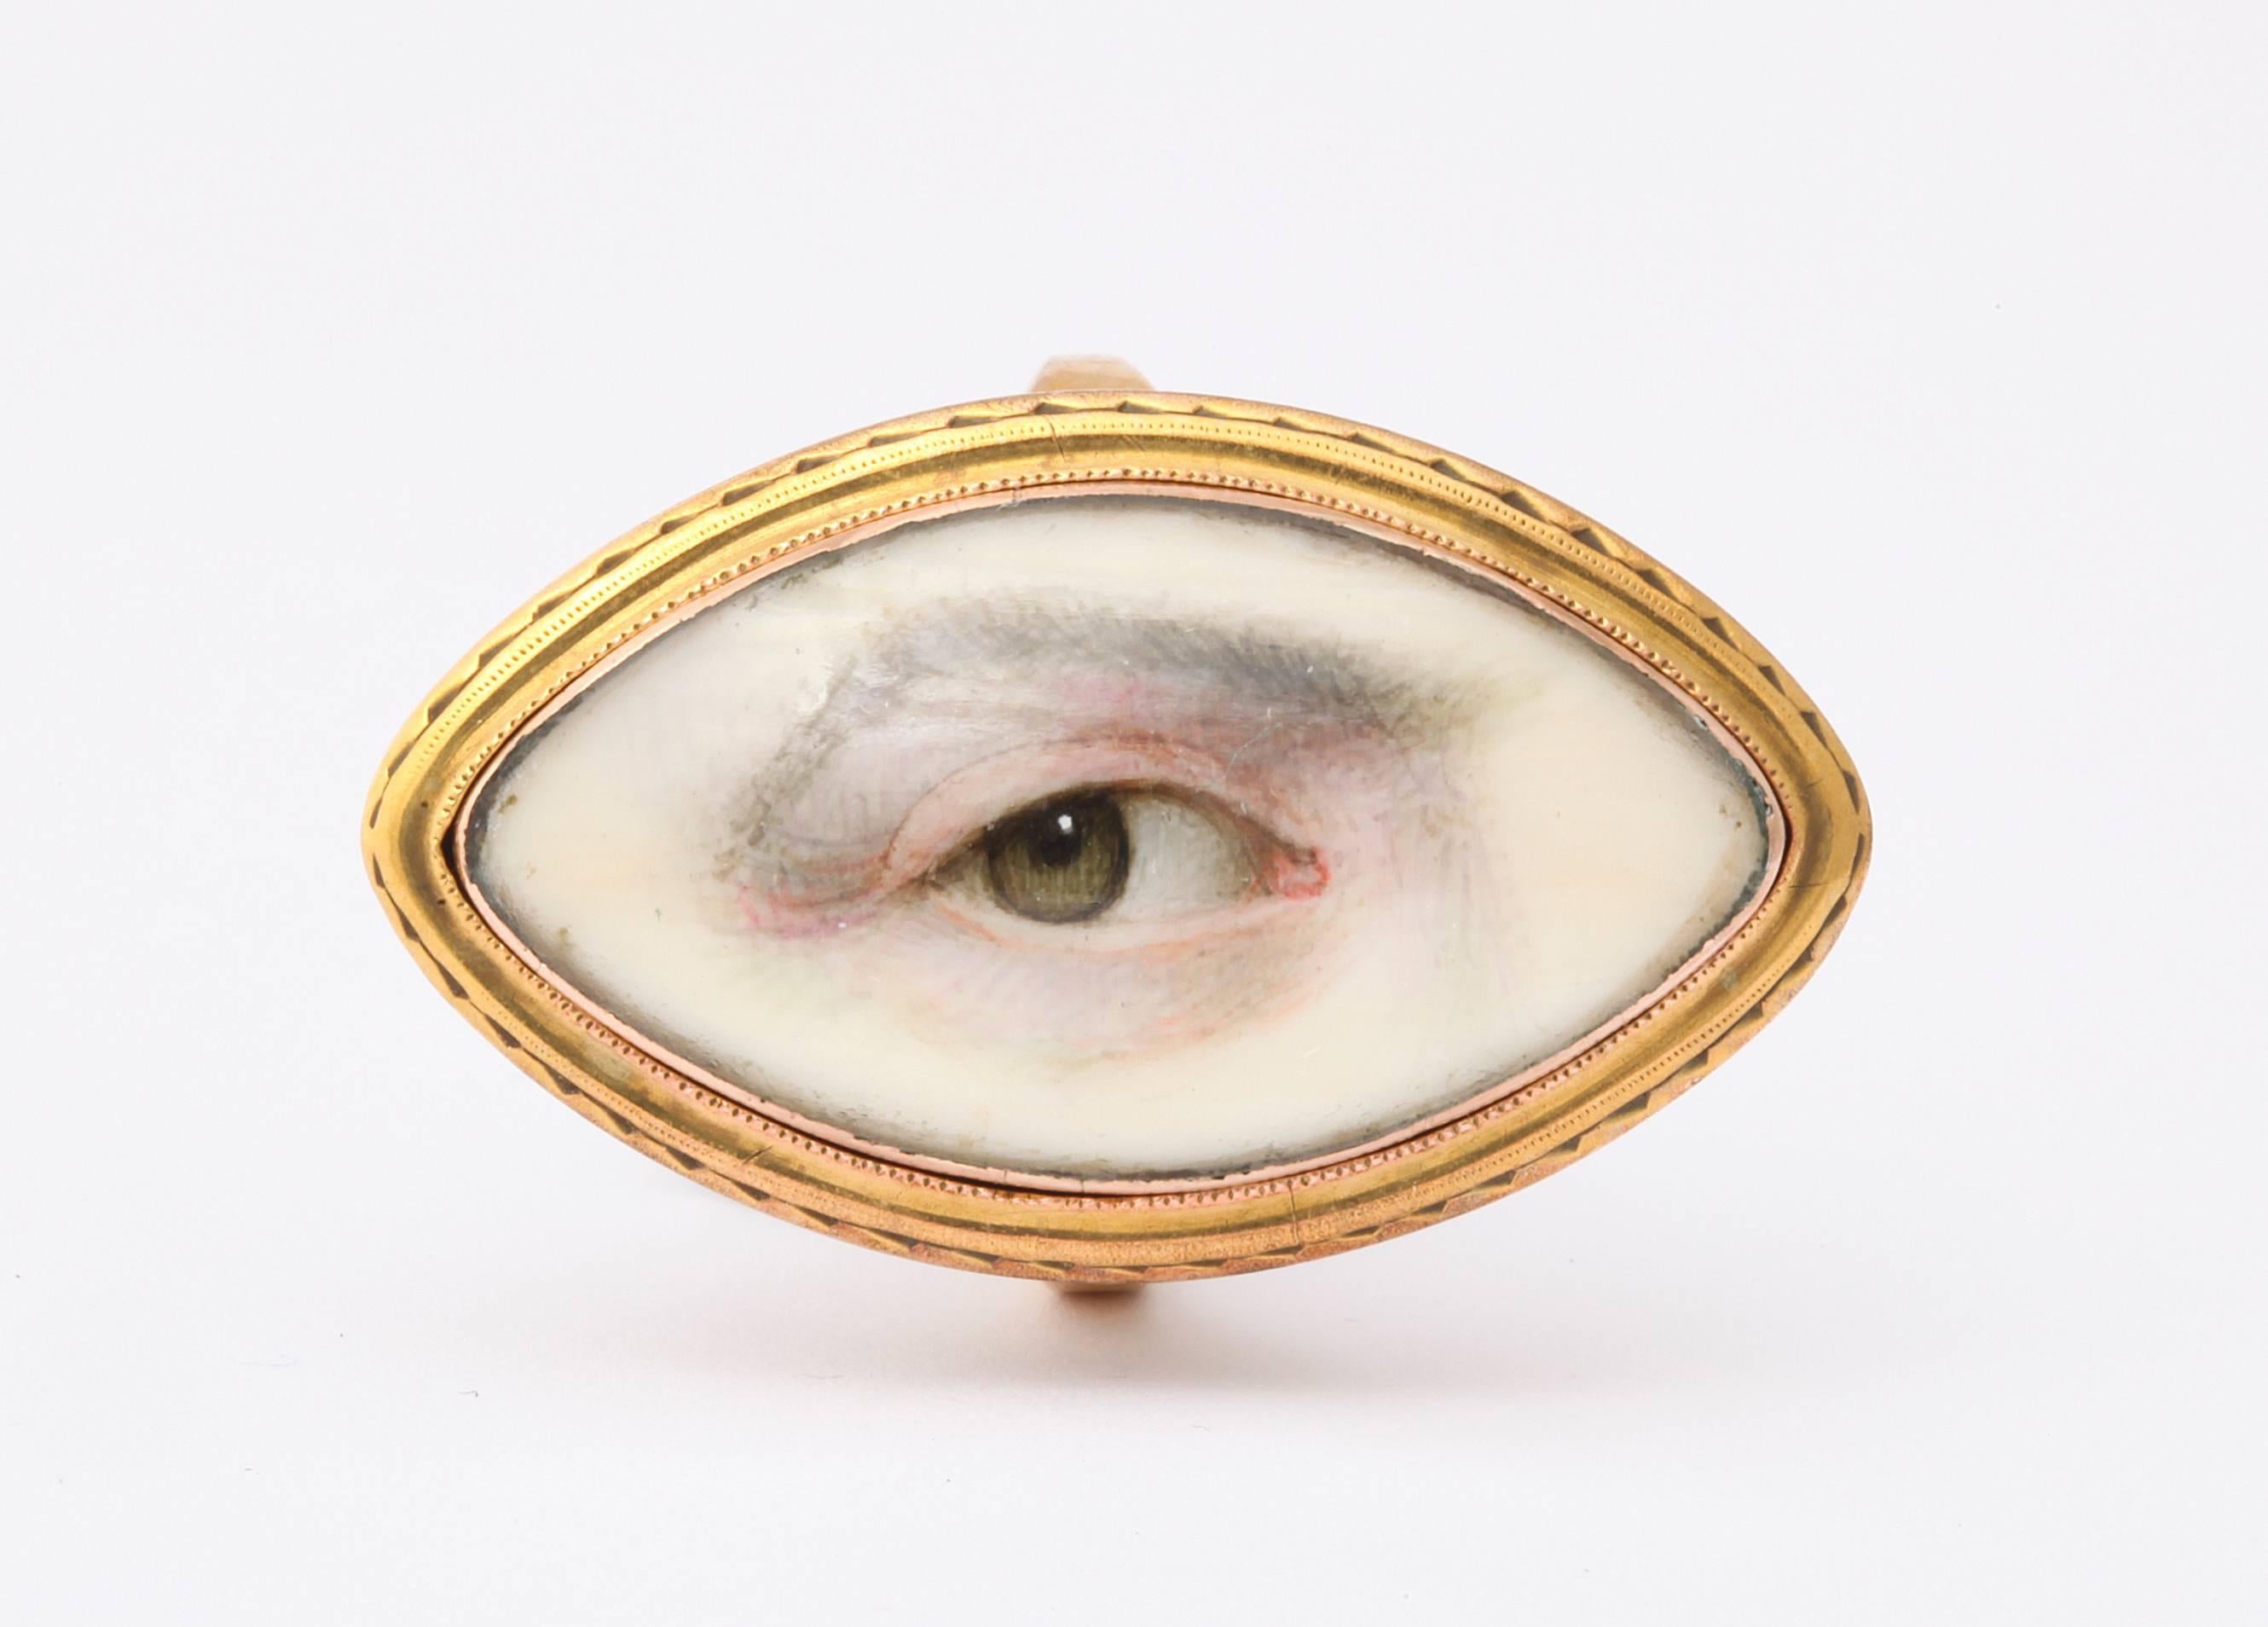 Like the Mona Lisa known to have eyes that follow you everywhere, this love gift of a 15kt gold Georgian Lover's ring sends thrills down your spine just as it must have done when given to the lover of the aristocratic gentleman who had his eye